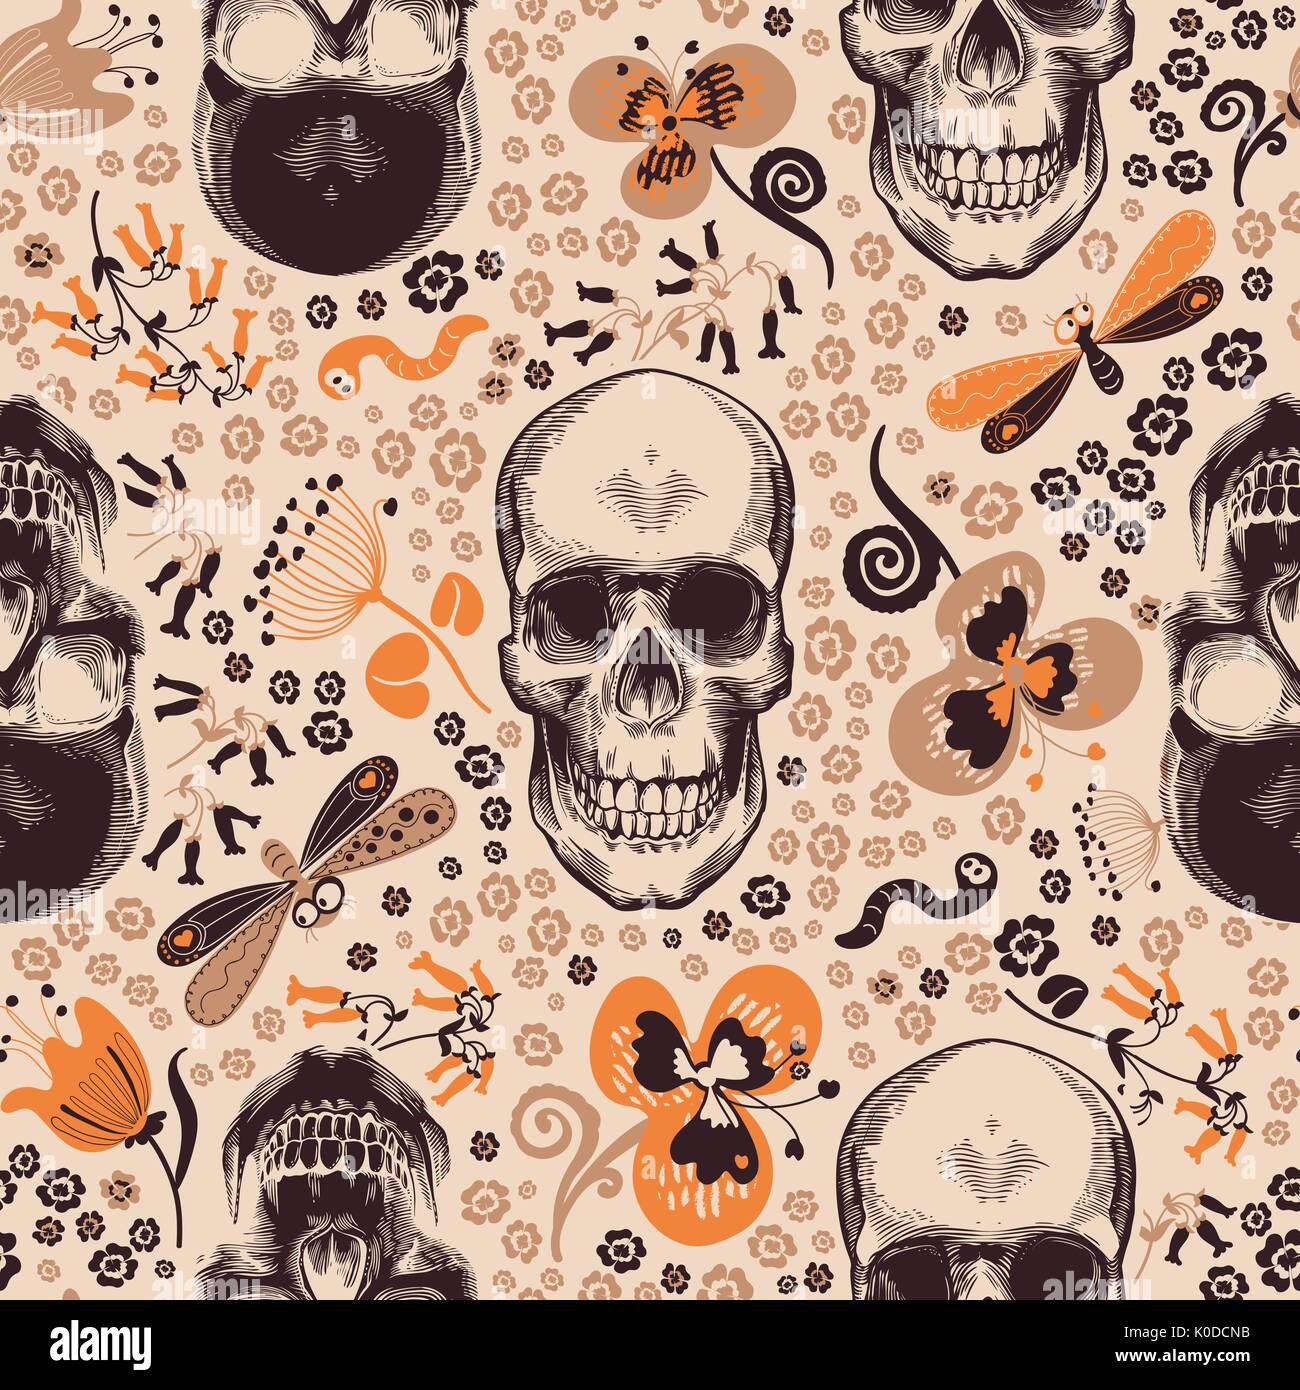 Gorgeous floral seamless pattern with skeleton skulls drawn in retro woodcut style, cartoon orange and brown flowers and funny insects against beige background. Vector illustration for fabric print. Stock Vector